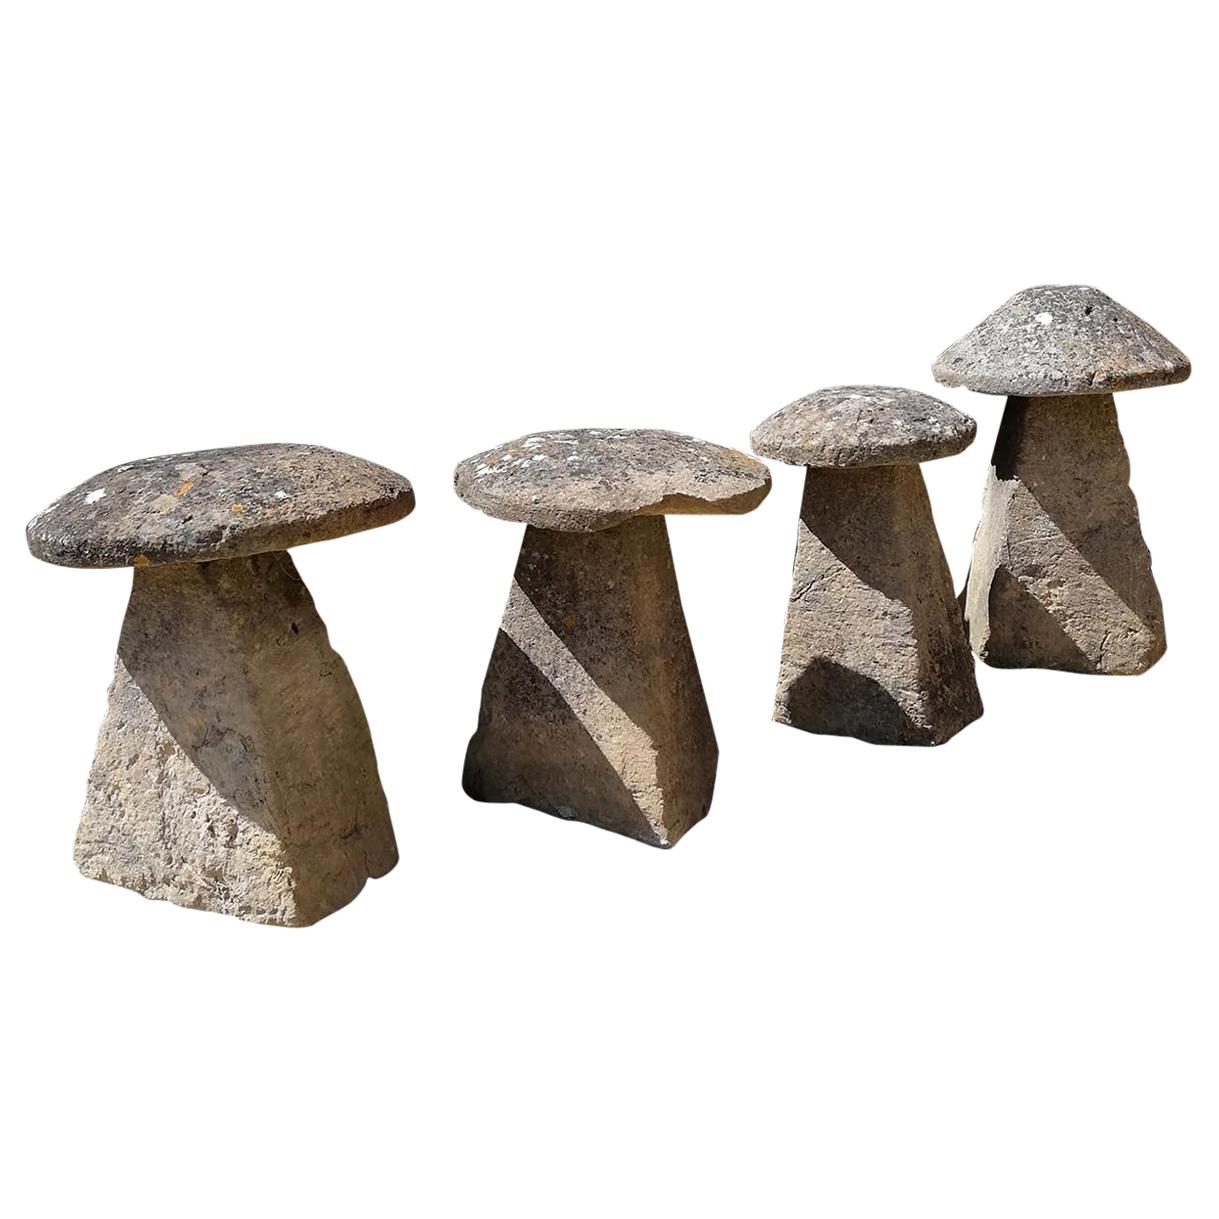 Group of Four Cotswold Stone Staddle Stones For Sale